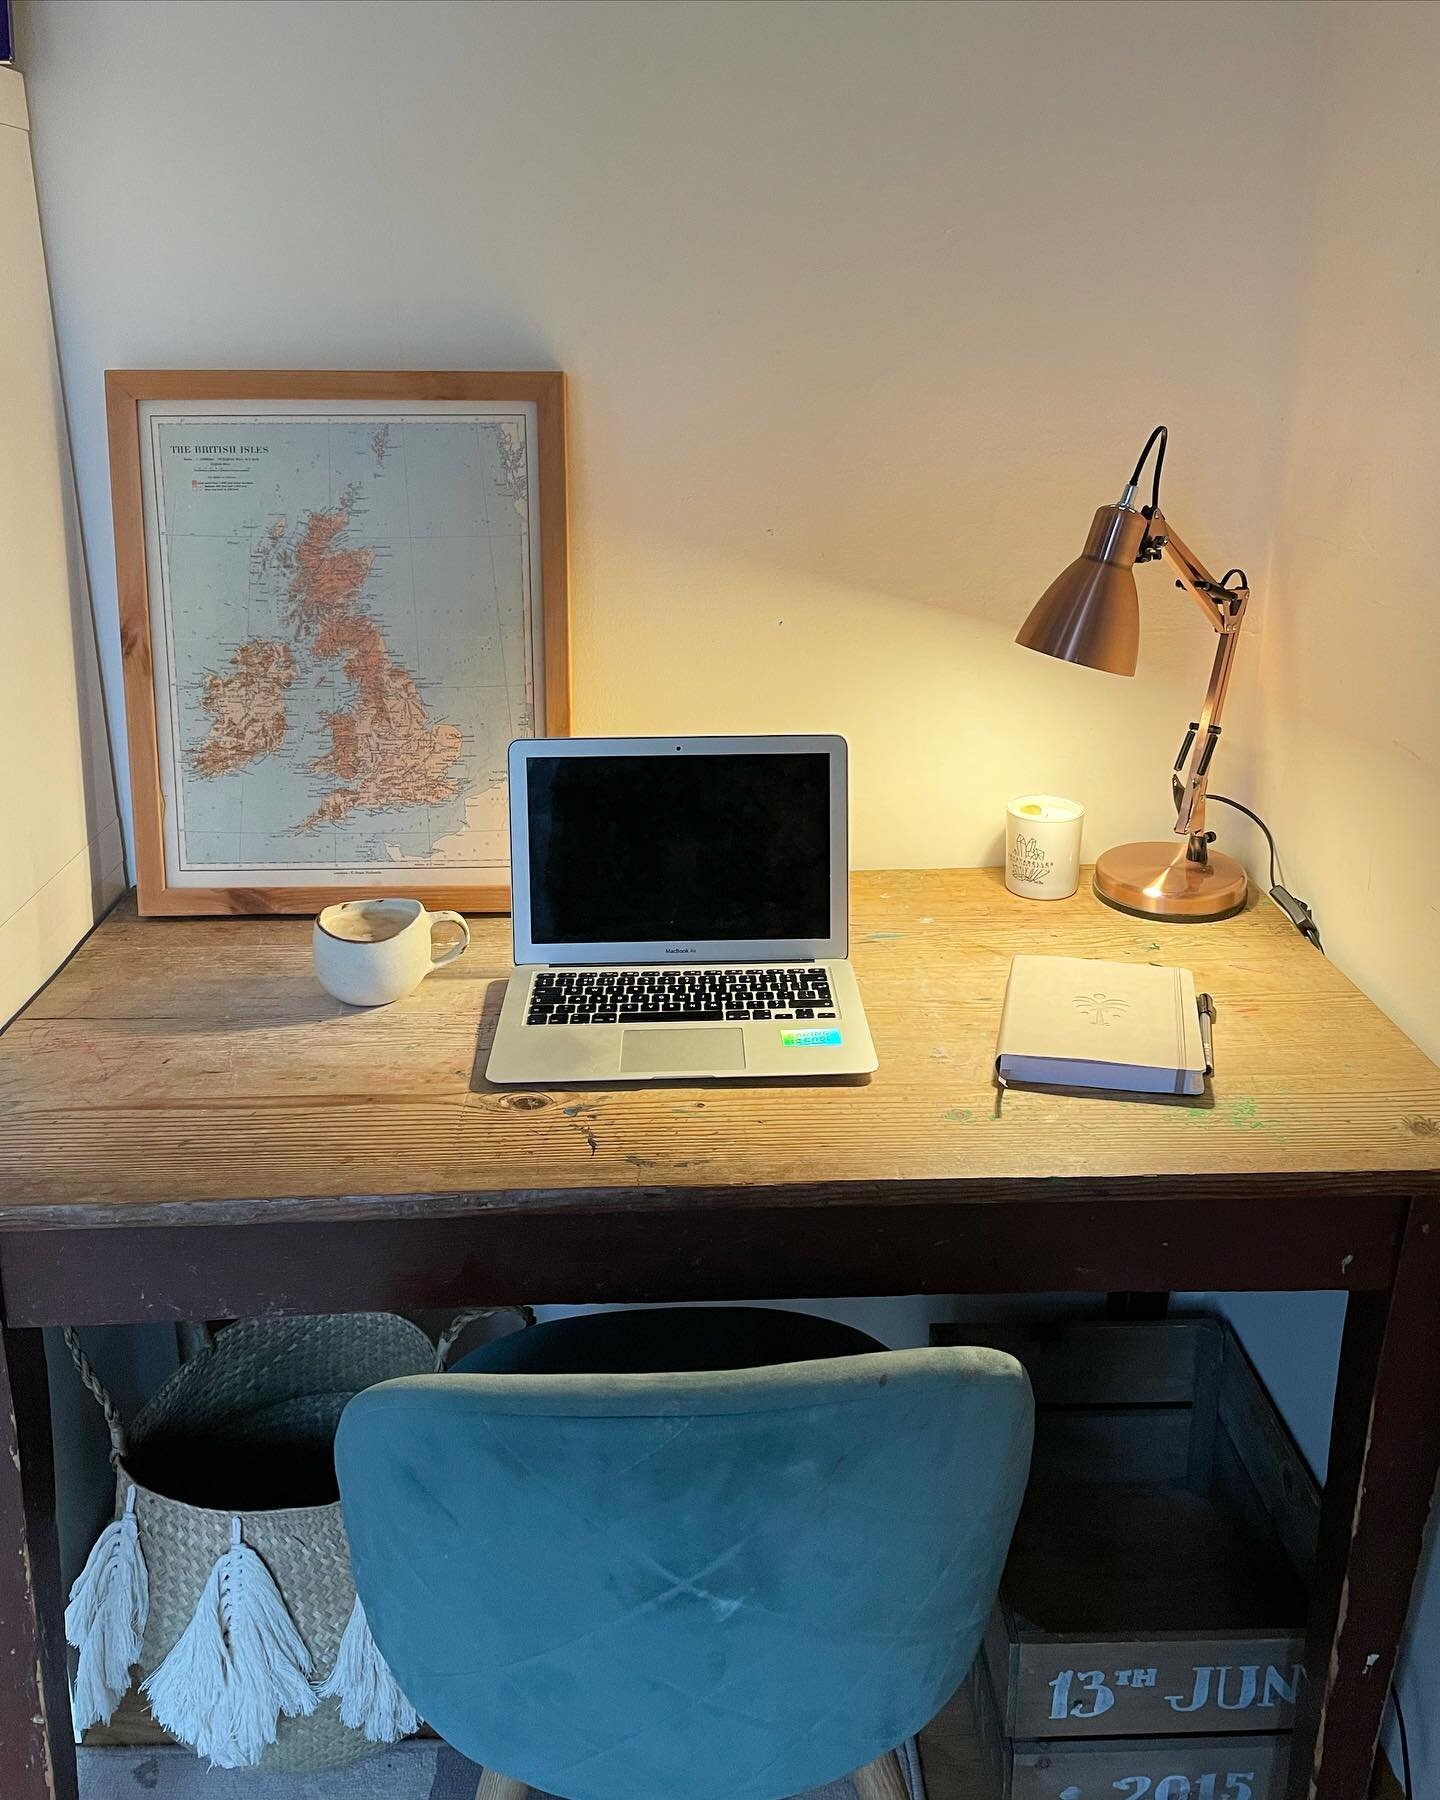 Okay, essentially this is just a photo of a table, but it&rsquo;s a big deal for me because after almost 18 months of working at my kitchen table I have made myself an actual work space at home ✨💥 and I was very excited to sit down here today and ge